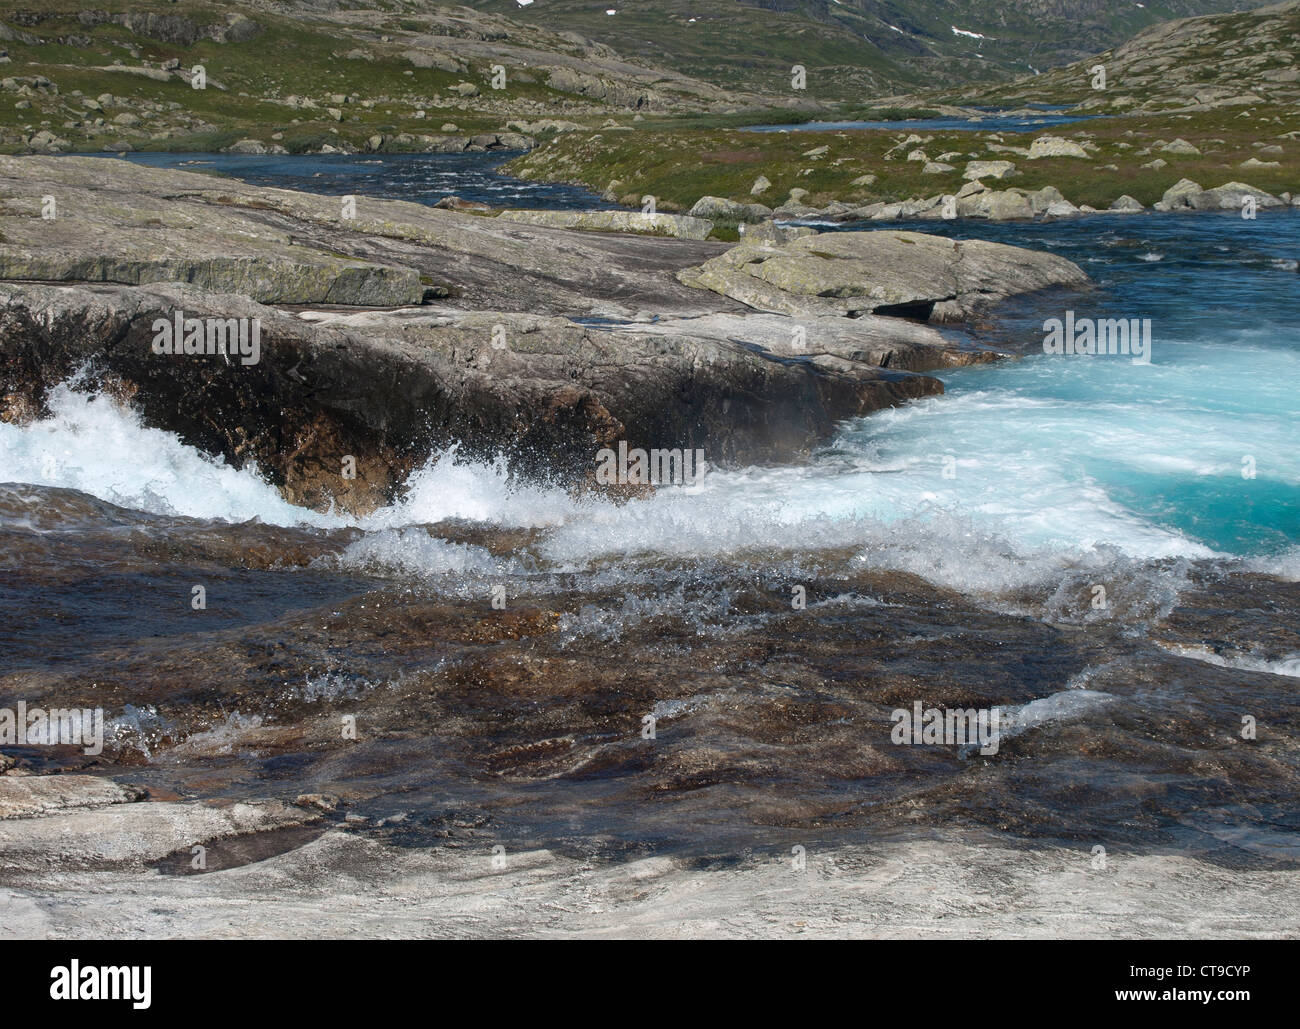 Rushing mountain river rapids with clear water in Norway Stock Photo